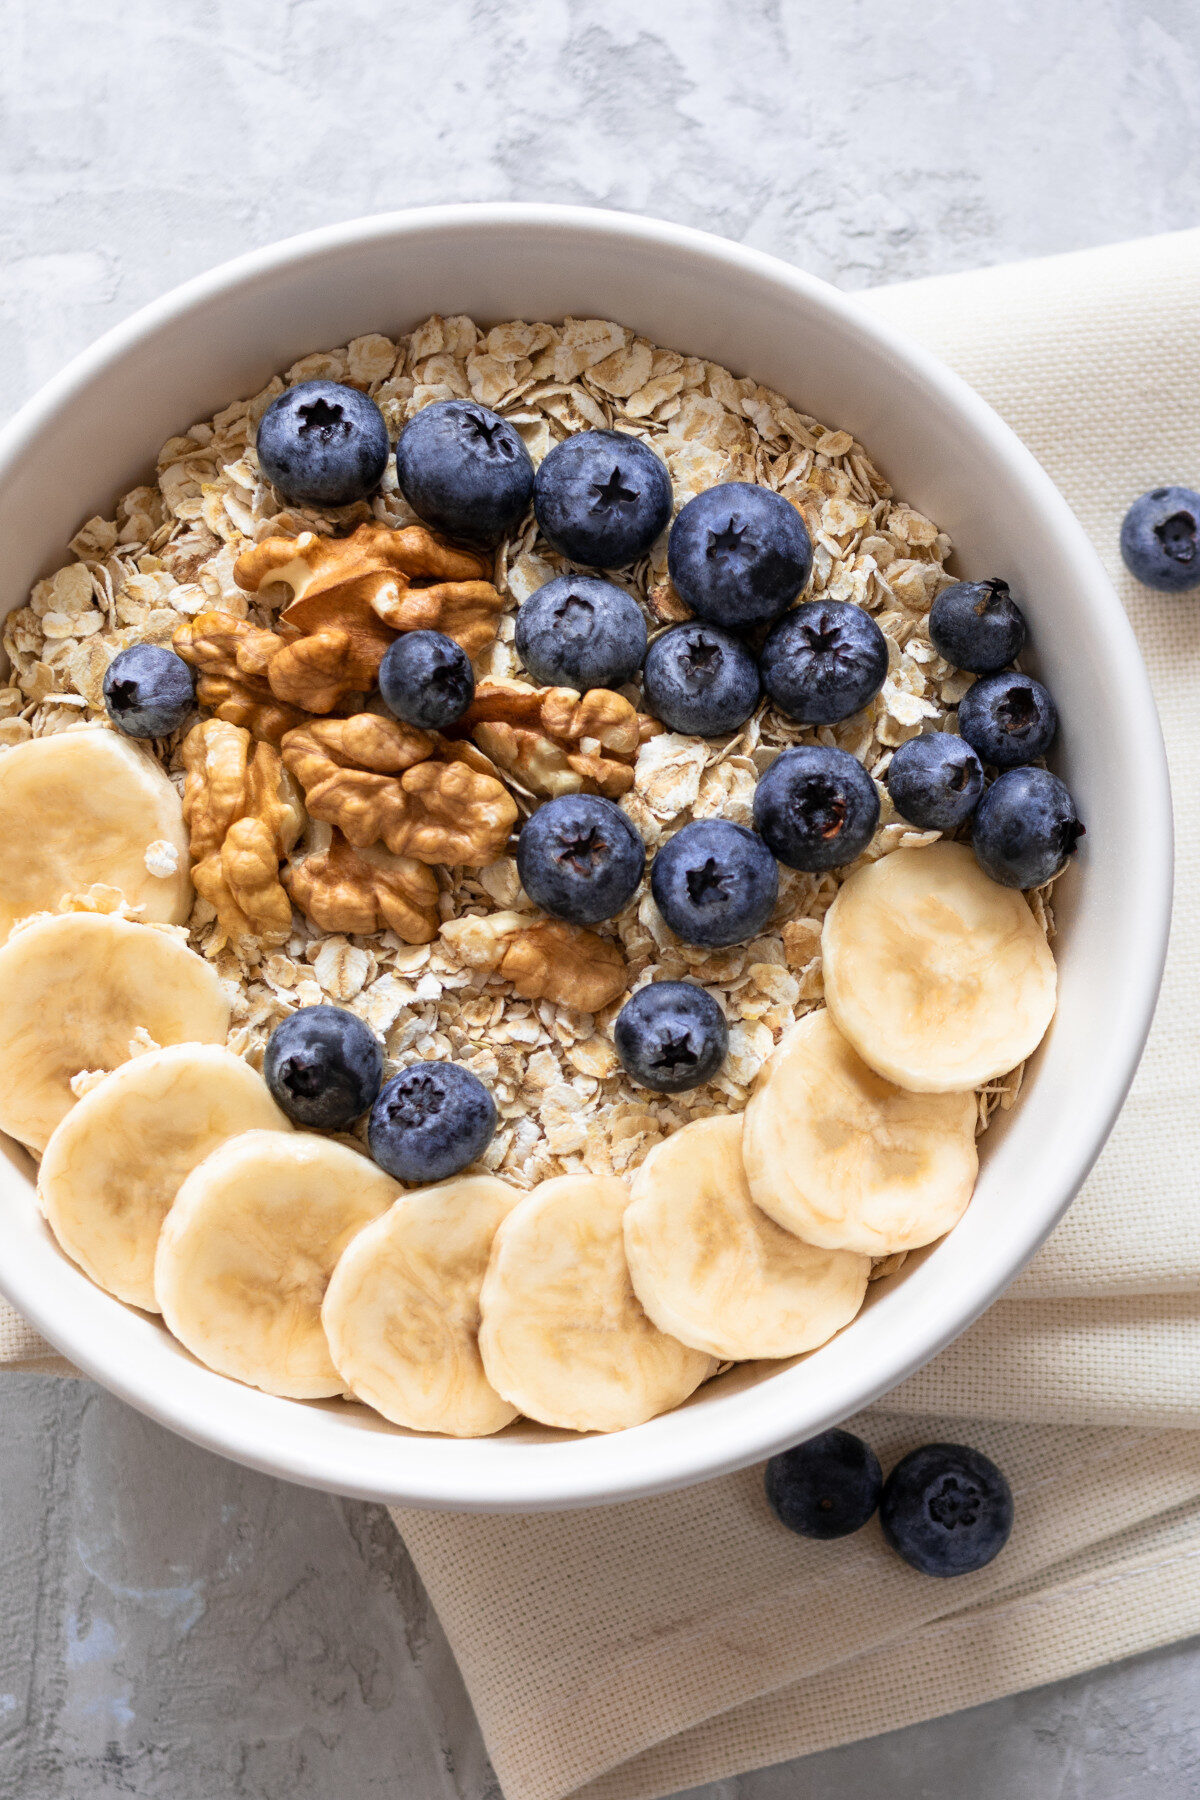 A healthy bowl of oatmeal with bananas, blueberries, and walnuts.